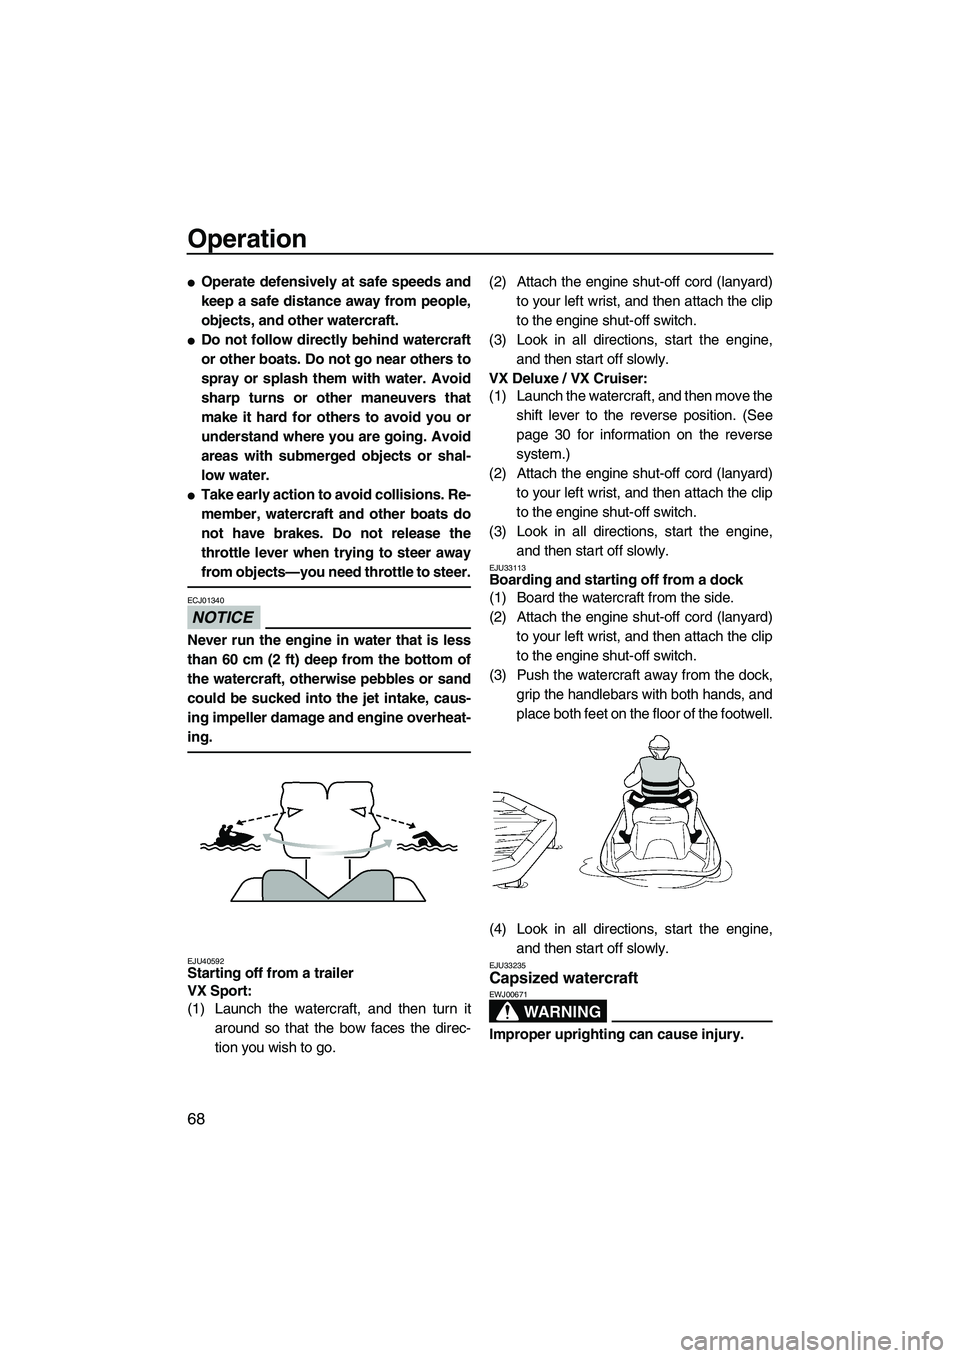 YAMAHA VX SPORT 2013  Owners Manual Operation
68
●Operate defensively at safe speeds and
keep a safe distance away from people,
objects, and other watercraft.
●Do not follow directly behind watercraft
or other boats. Do not go near 